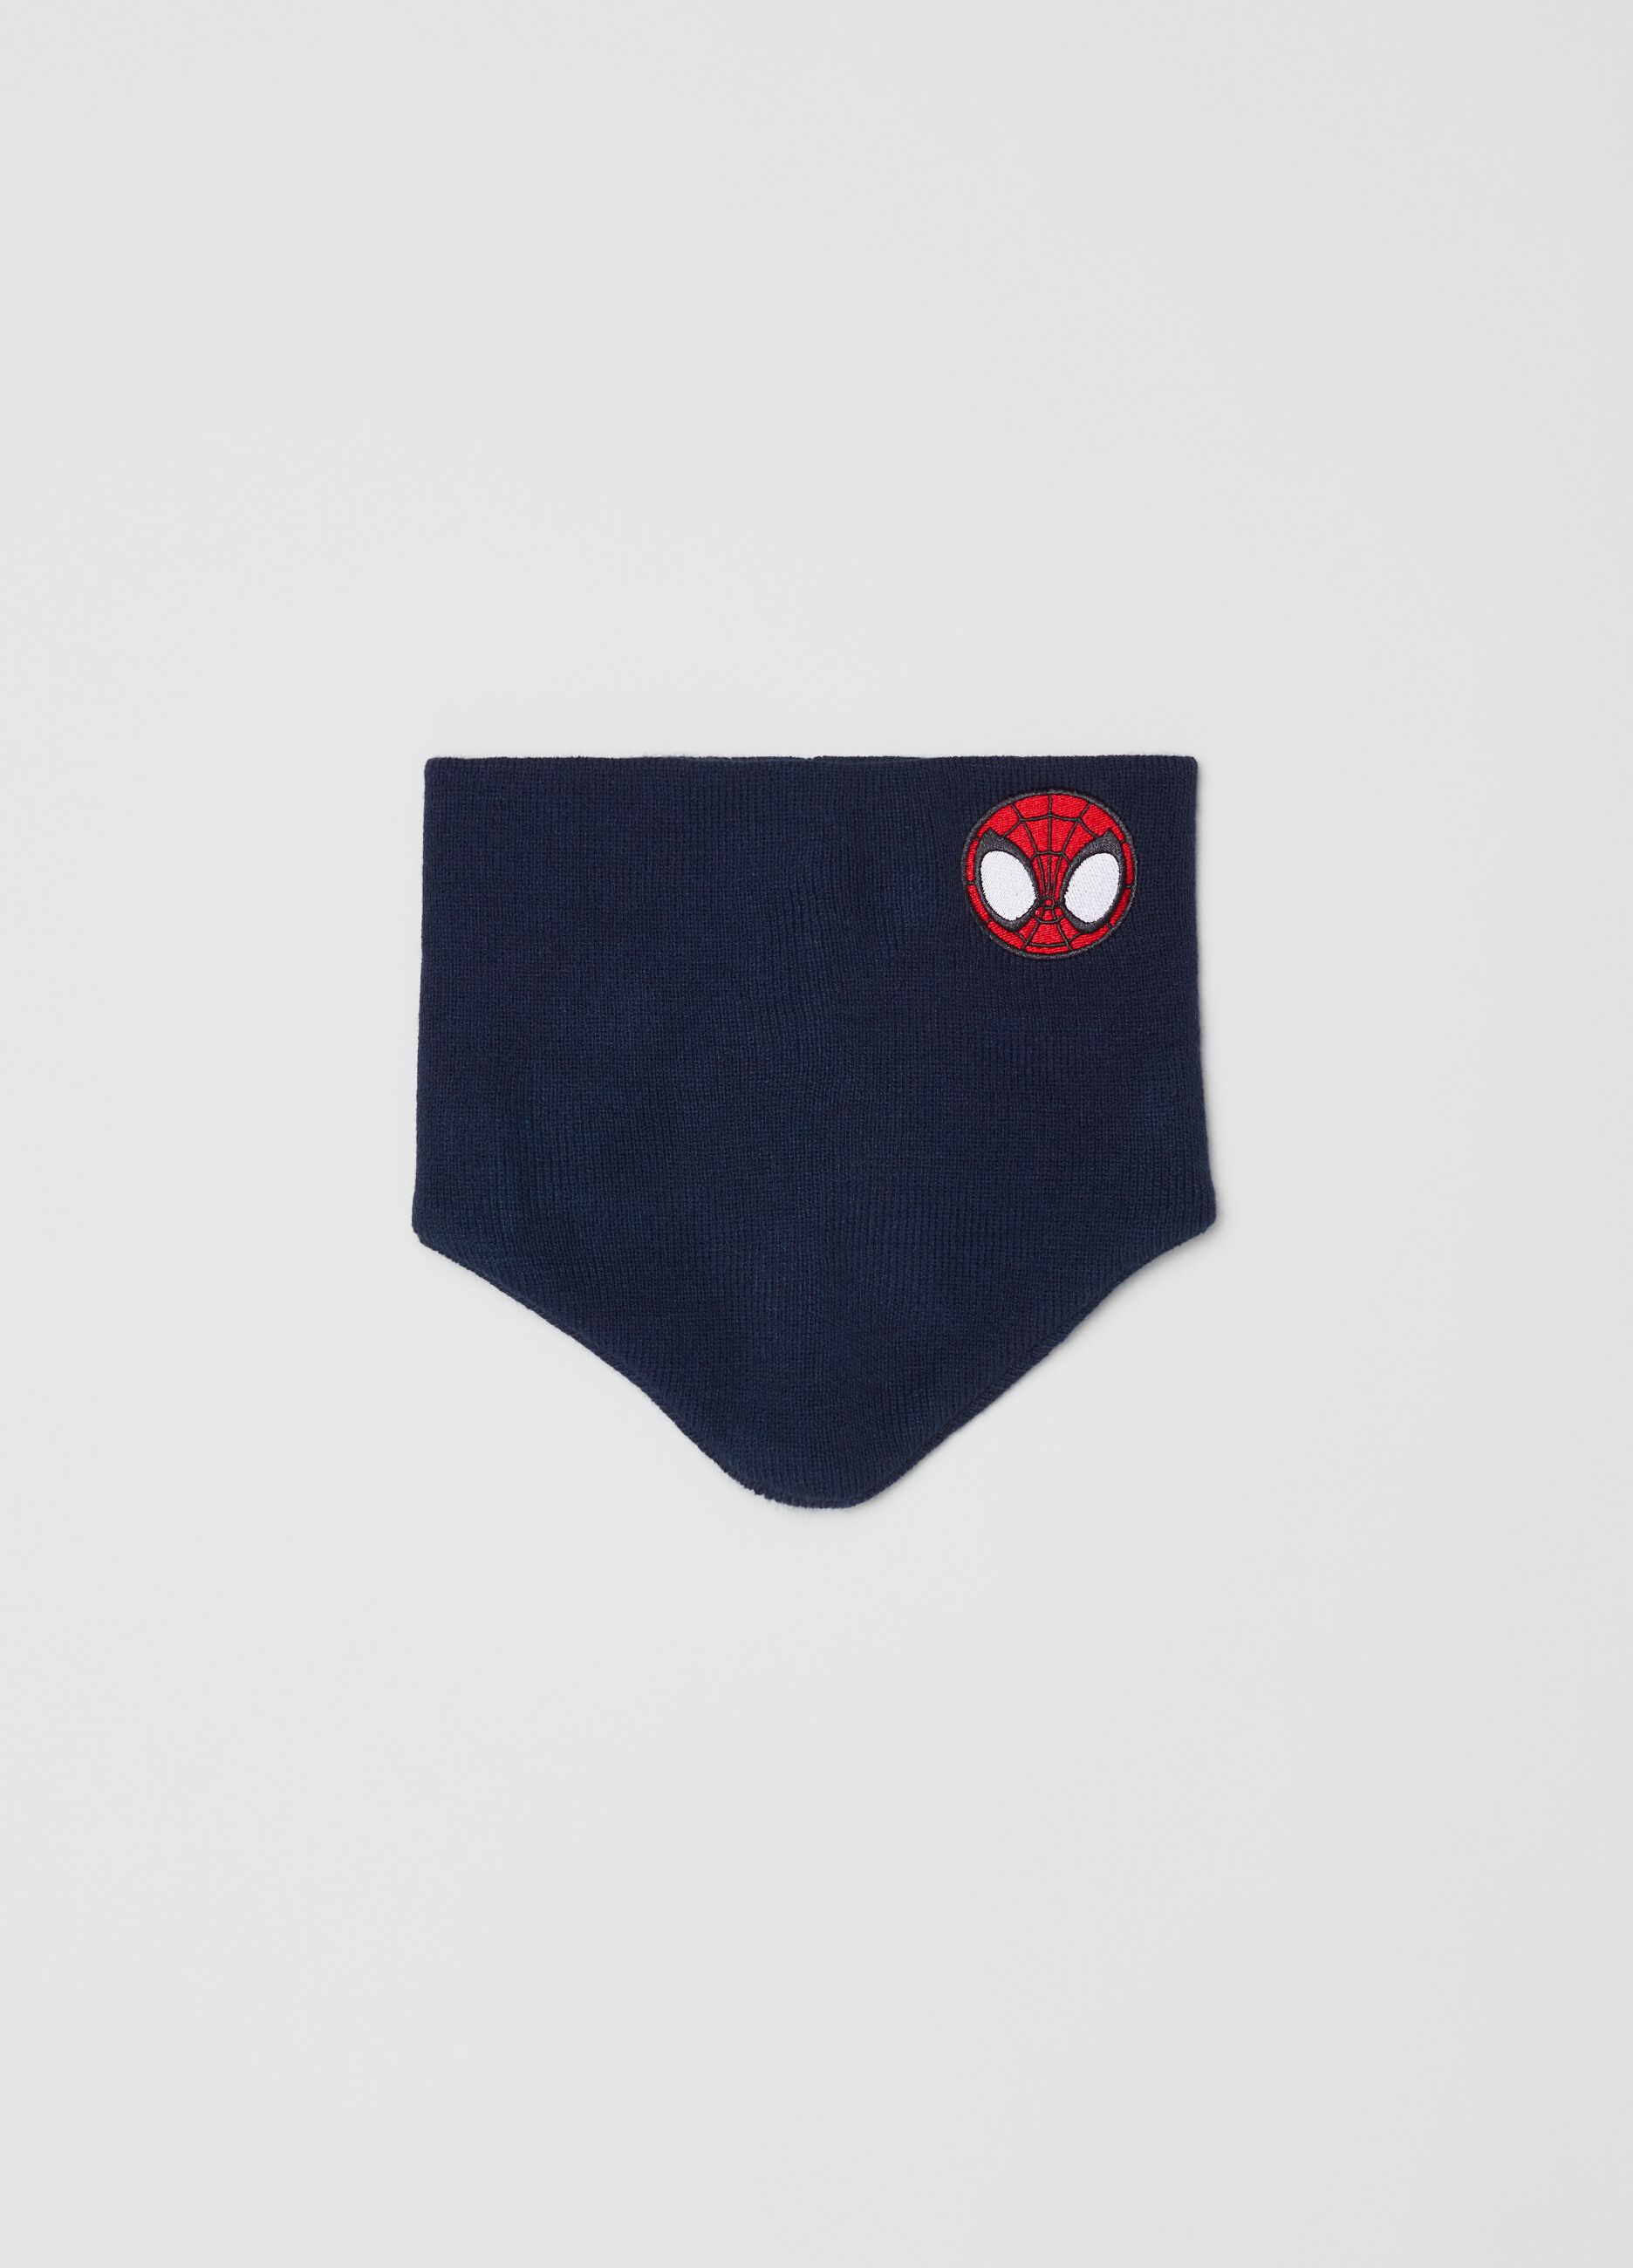 FAGOTTINO Baby Boy's Black/Red Knitted neck warmer with Spider-Man patch